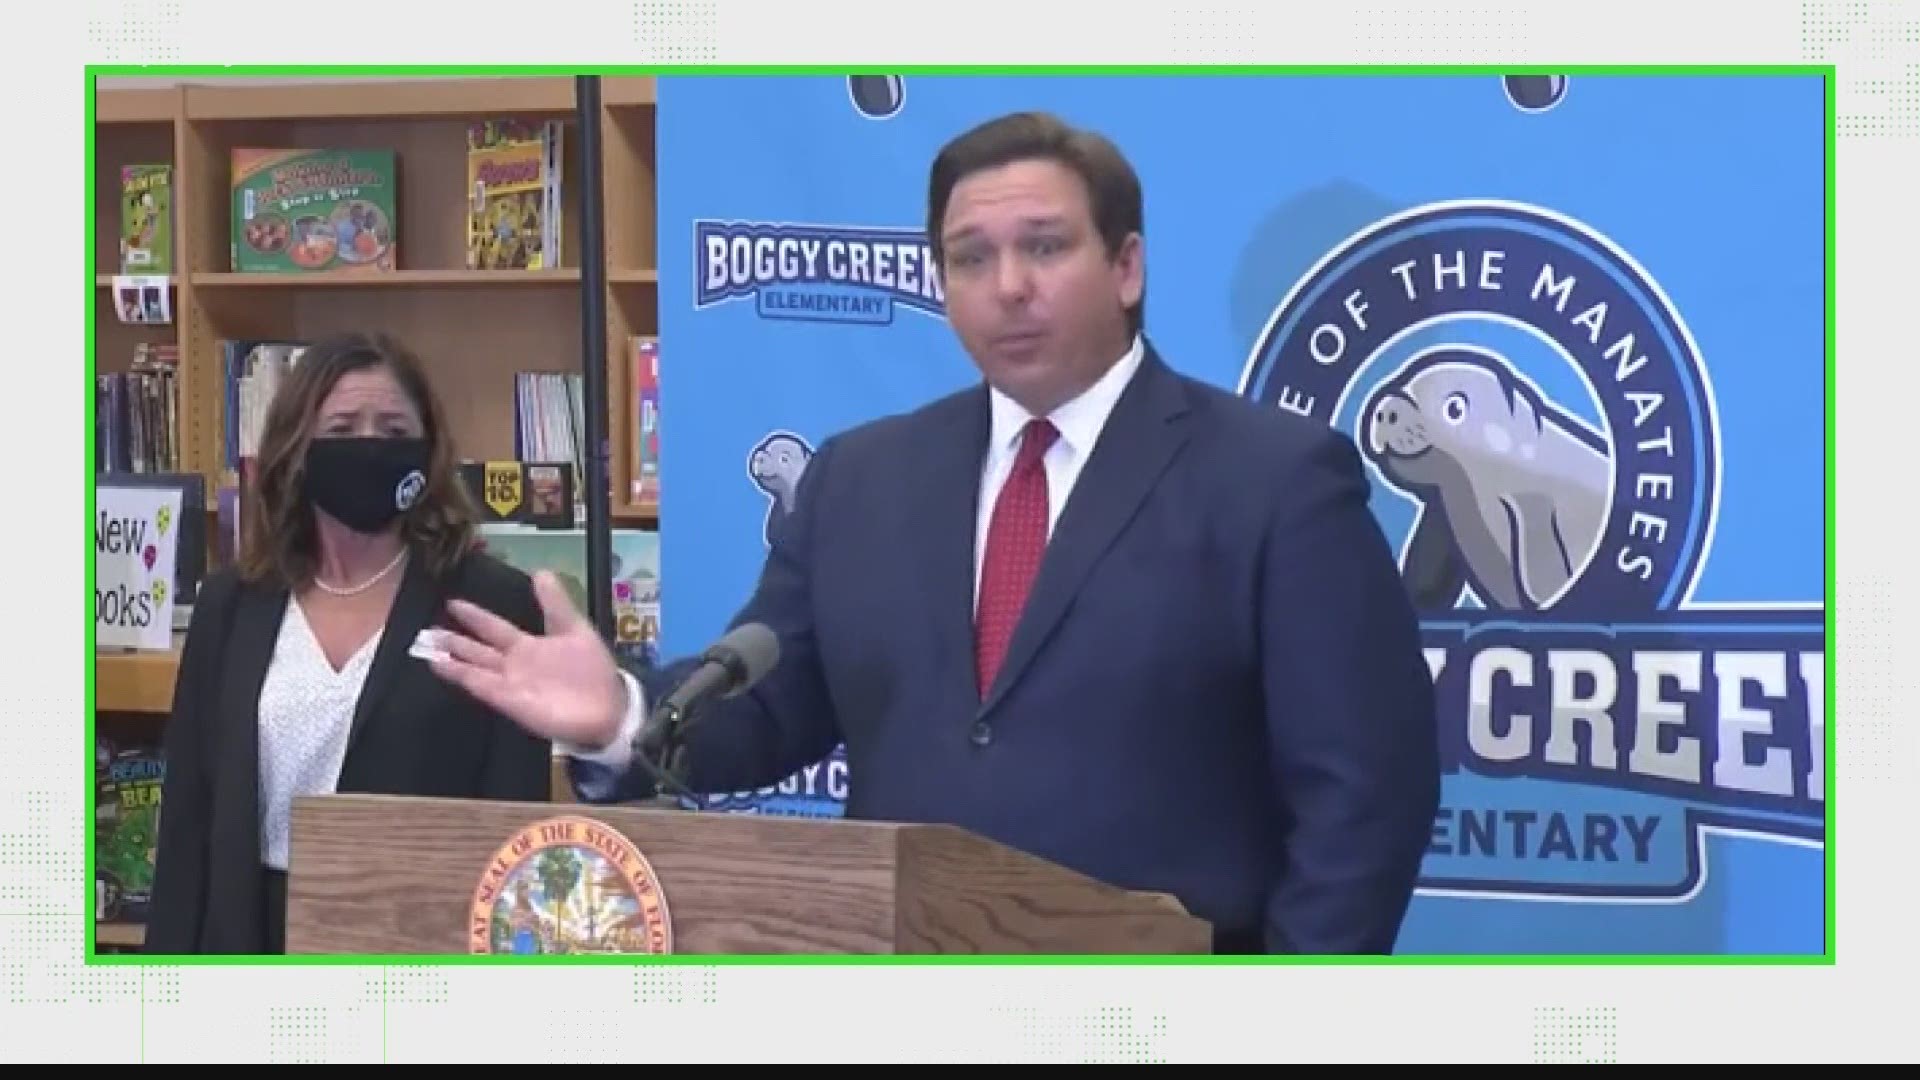 Gov. Ron DeSantis made the two claims in his press conference about coronavirus in the state. It's the first time he addressed the rise in case numbers recently.